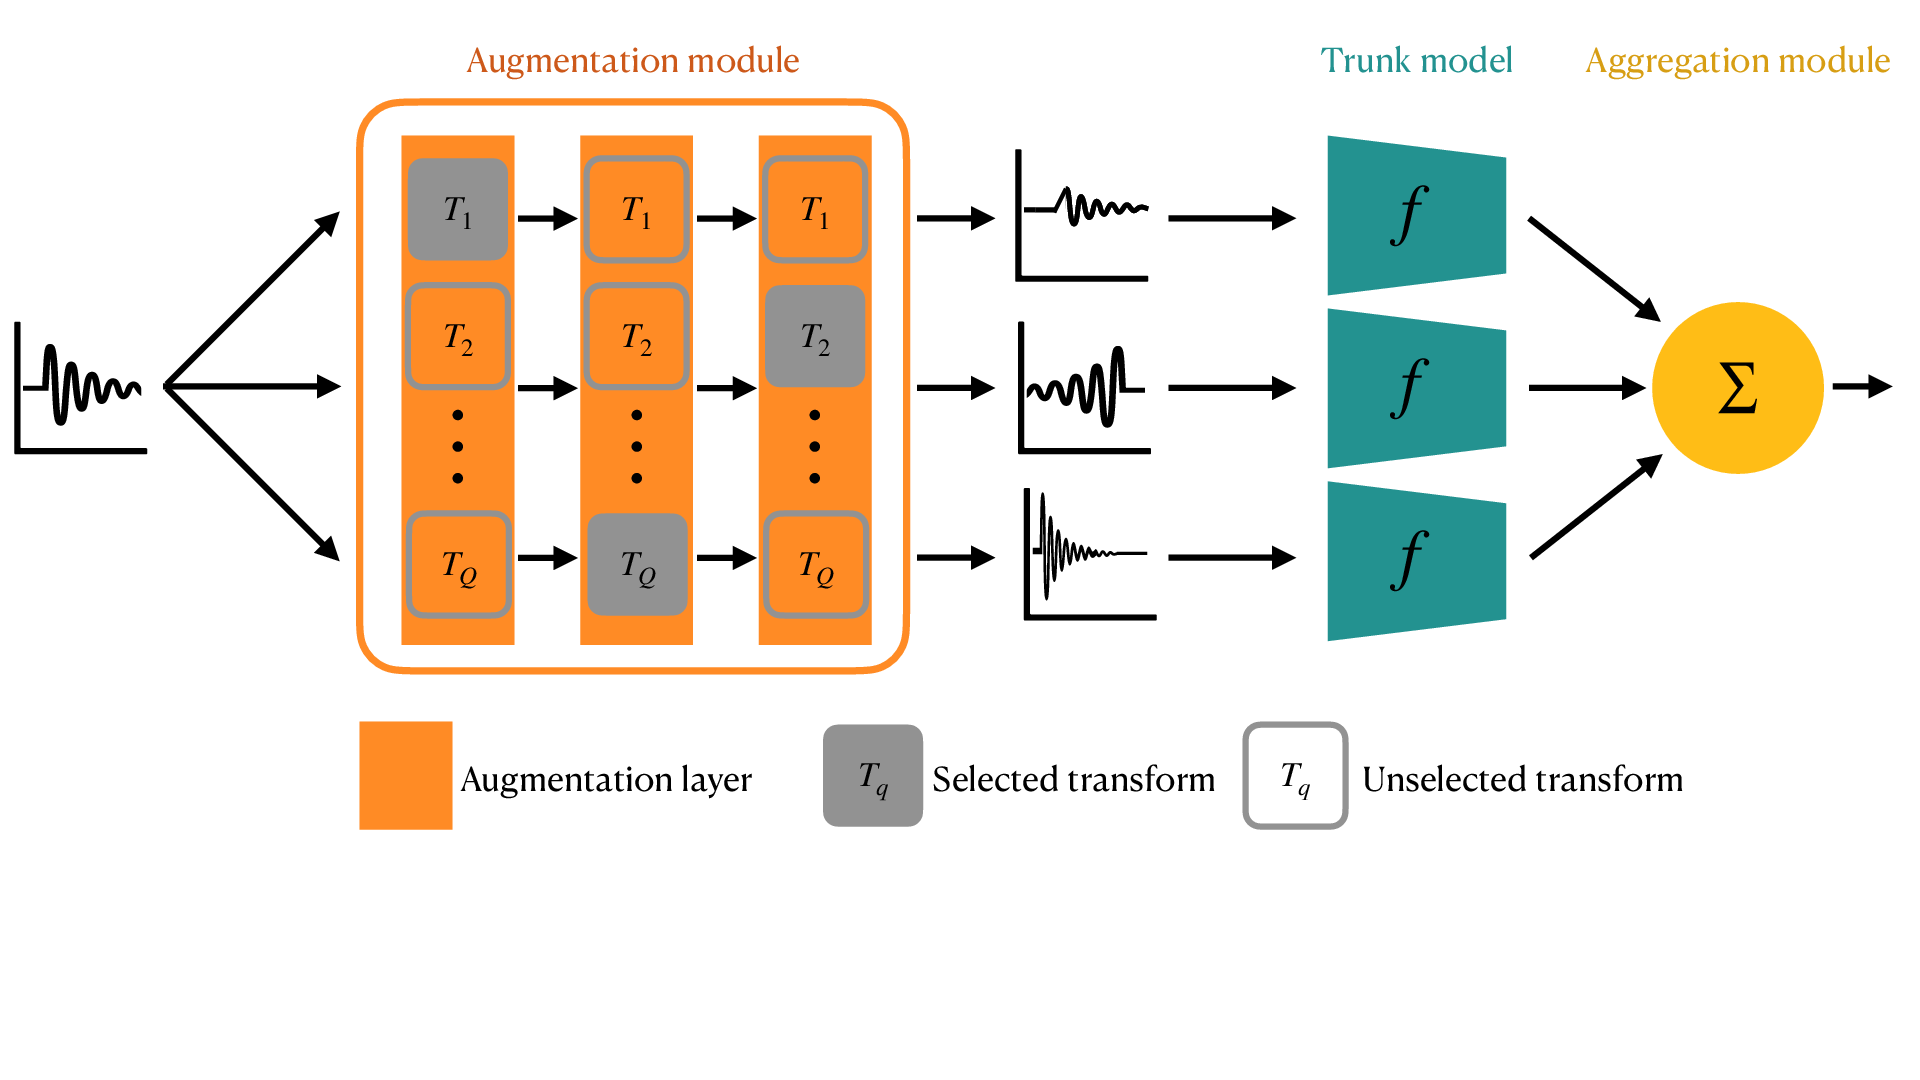 General architecture of AugNet. Input data is copied C times and randomly augmented by the augmentation layers forming the augmentation module. Each copy is then mapped by the trunk model f, whose predictions are averaged by the aggregation module. Parameters of both f and the augmentation layers are learned together from the training set.